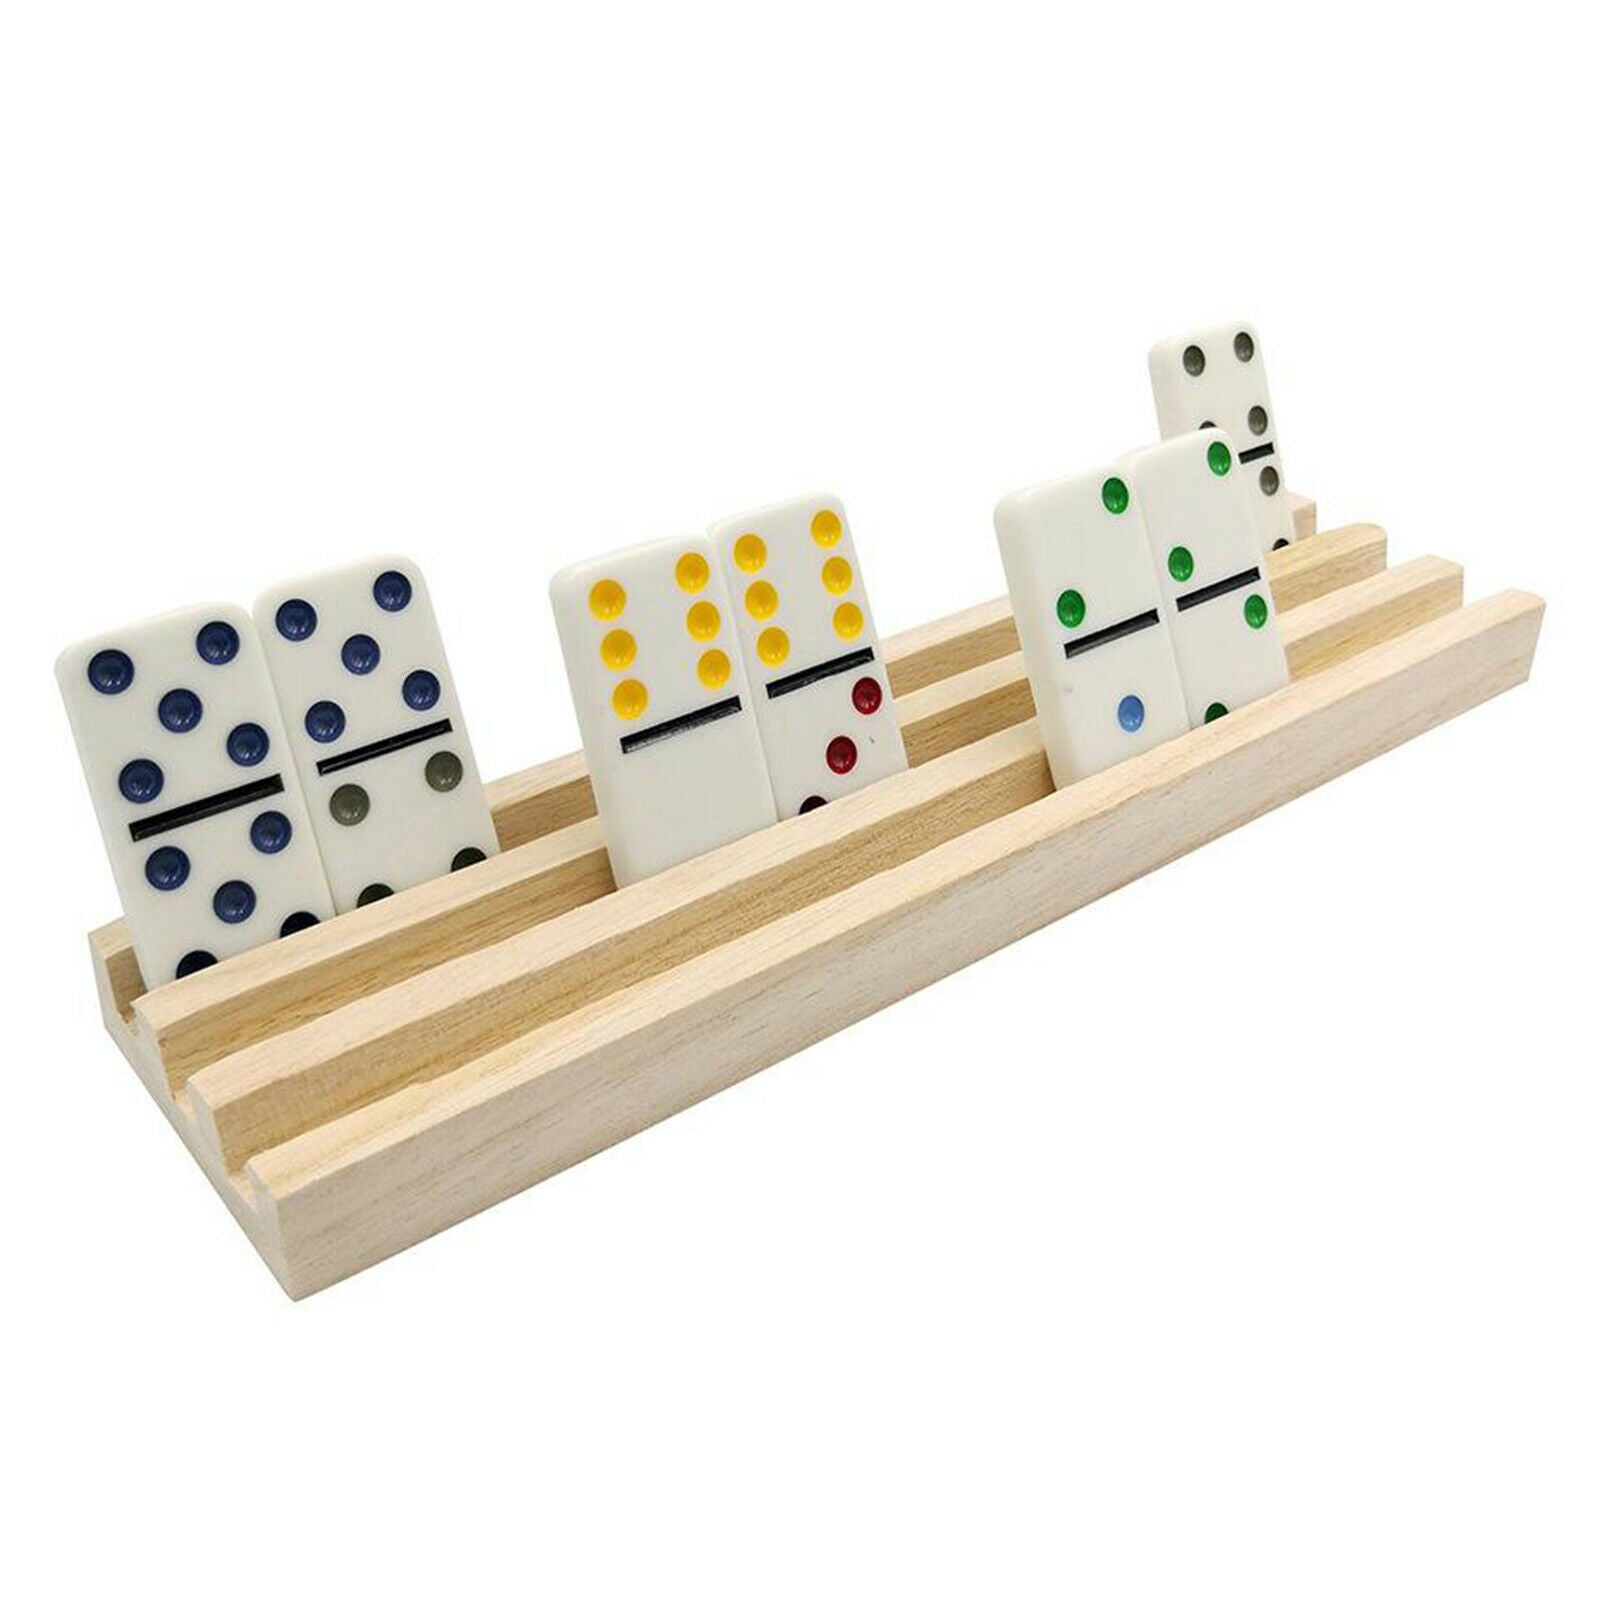 4pcs / set Wooden Domino Tile Trays Organizer for Mexican Train Chicken